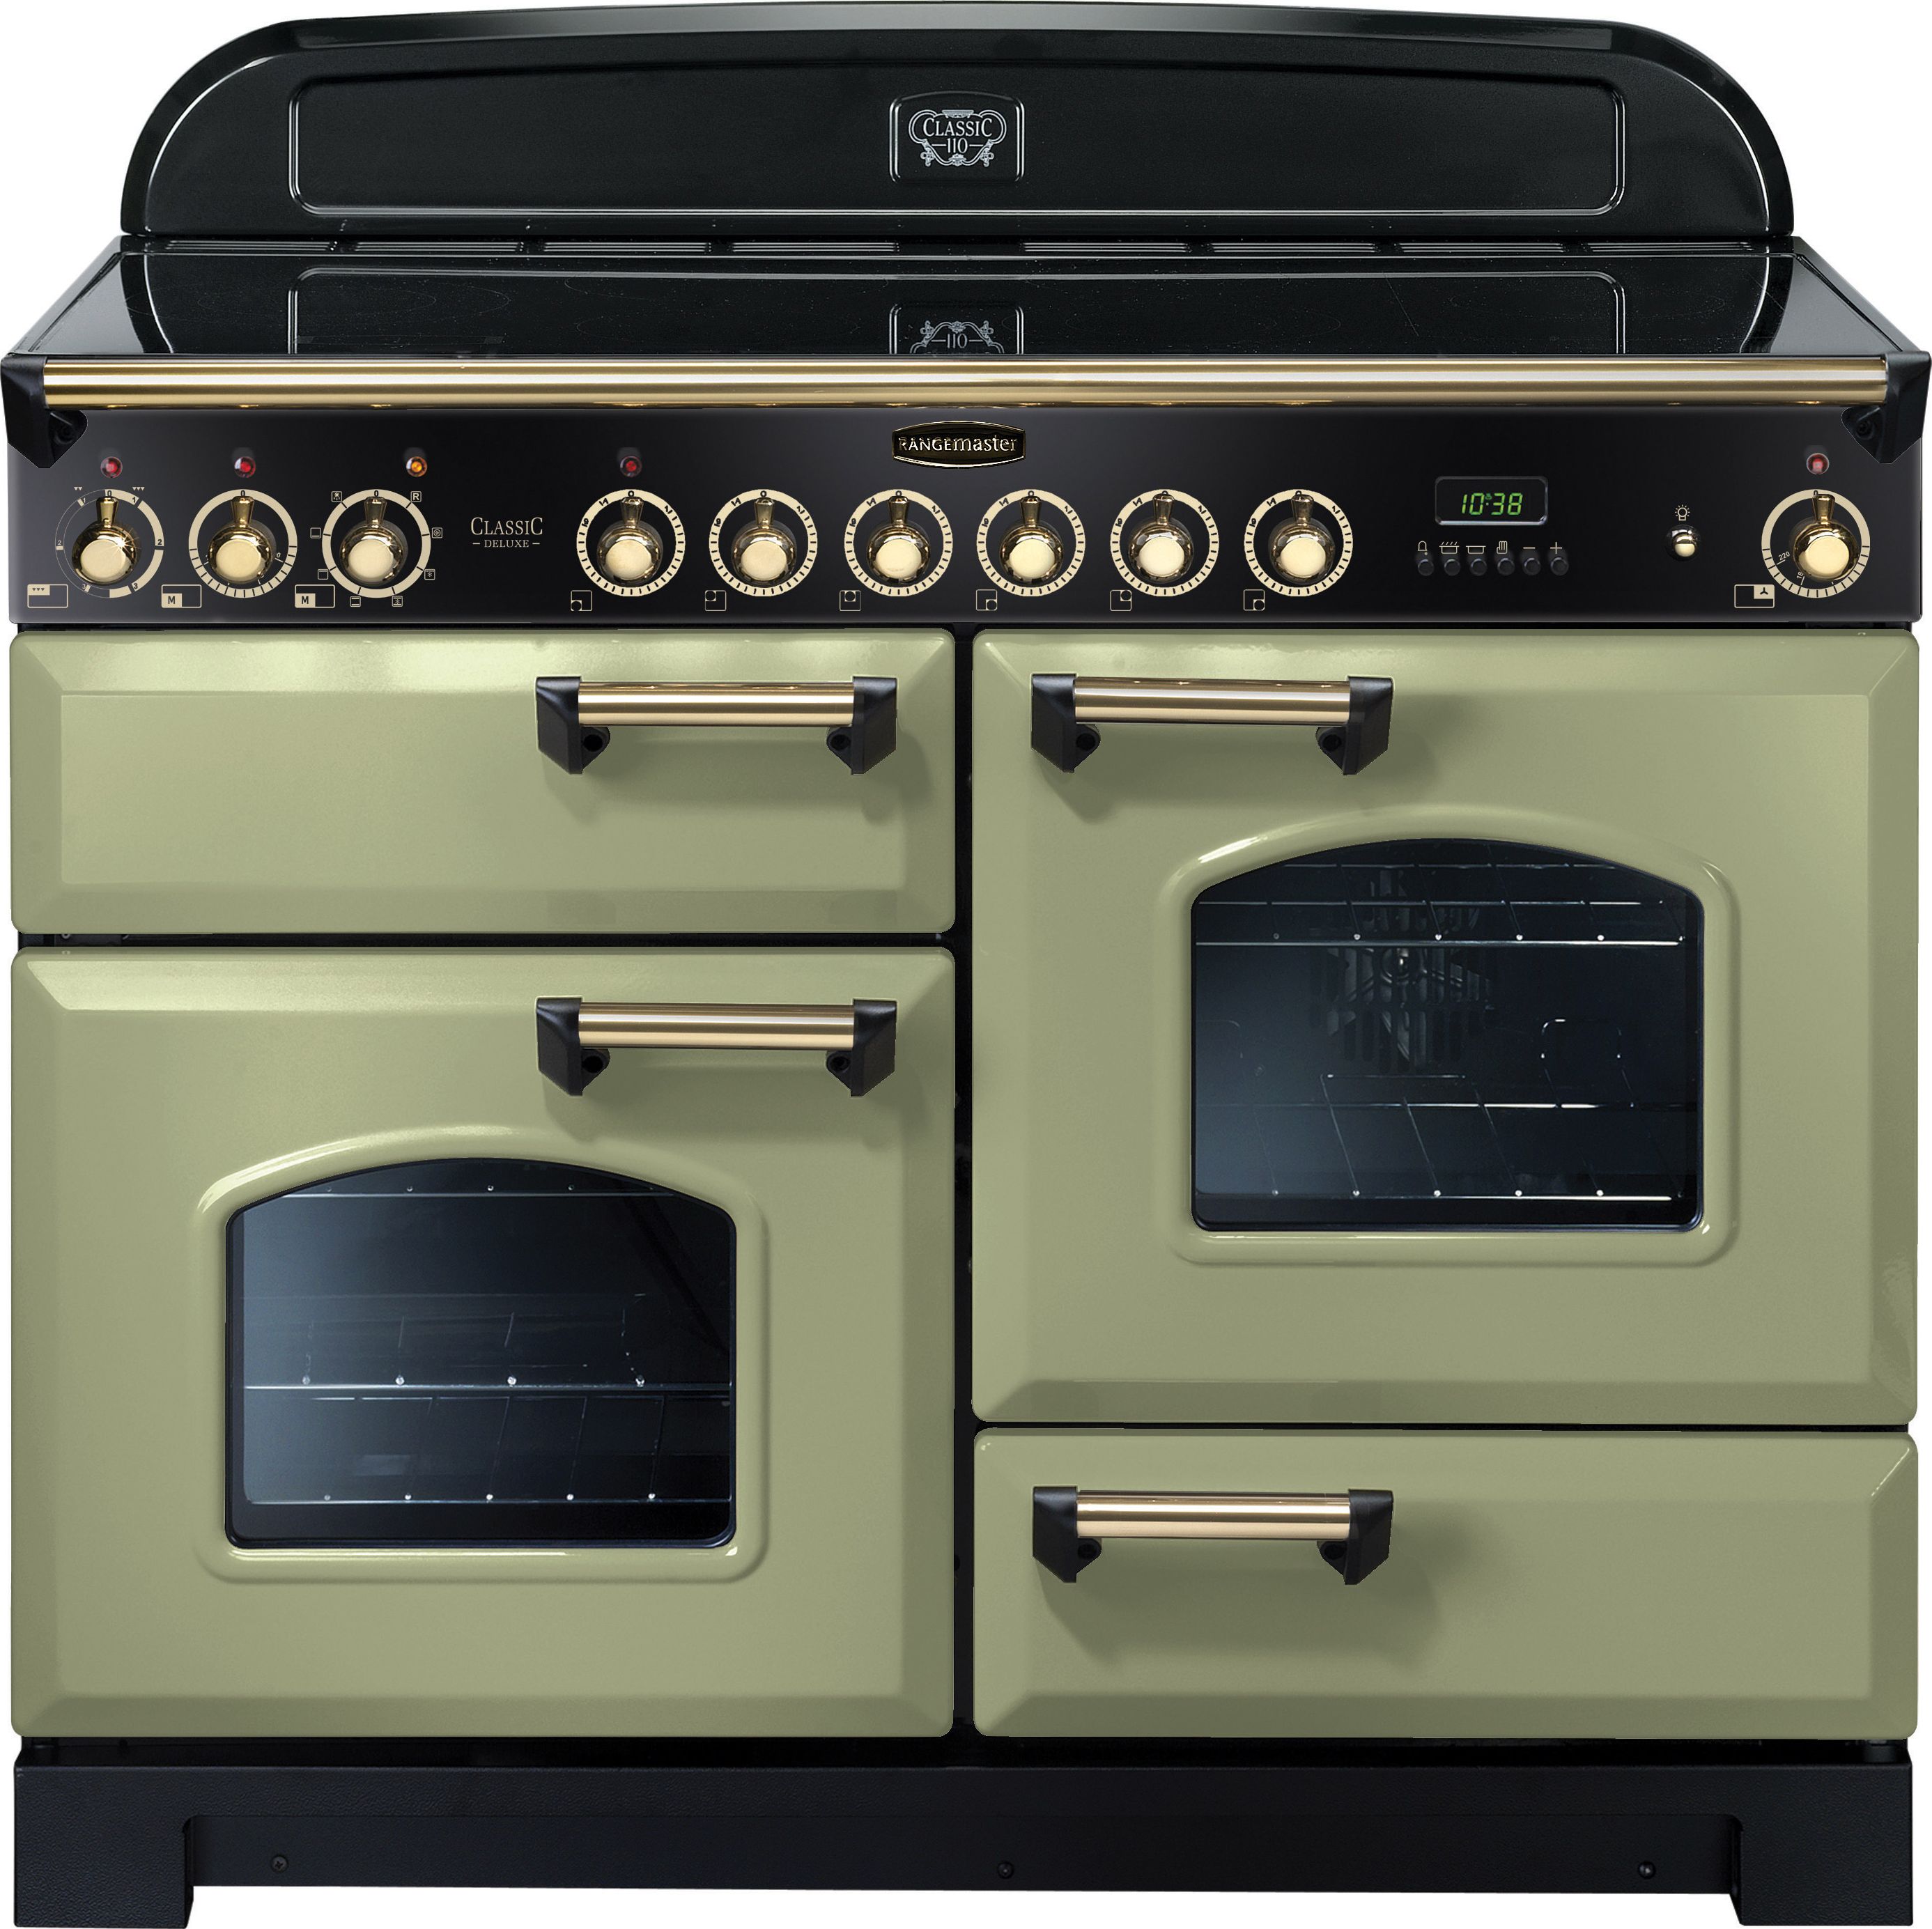 Rangemaster Classic Deluxe CDL110ECOG/B 110cm Electric Range Cooker with Ceramic Hob - Olive Green / Brass - A/A Rated, Green